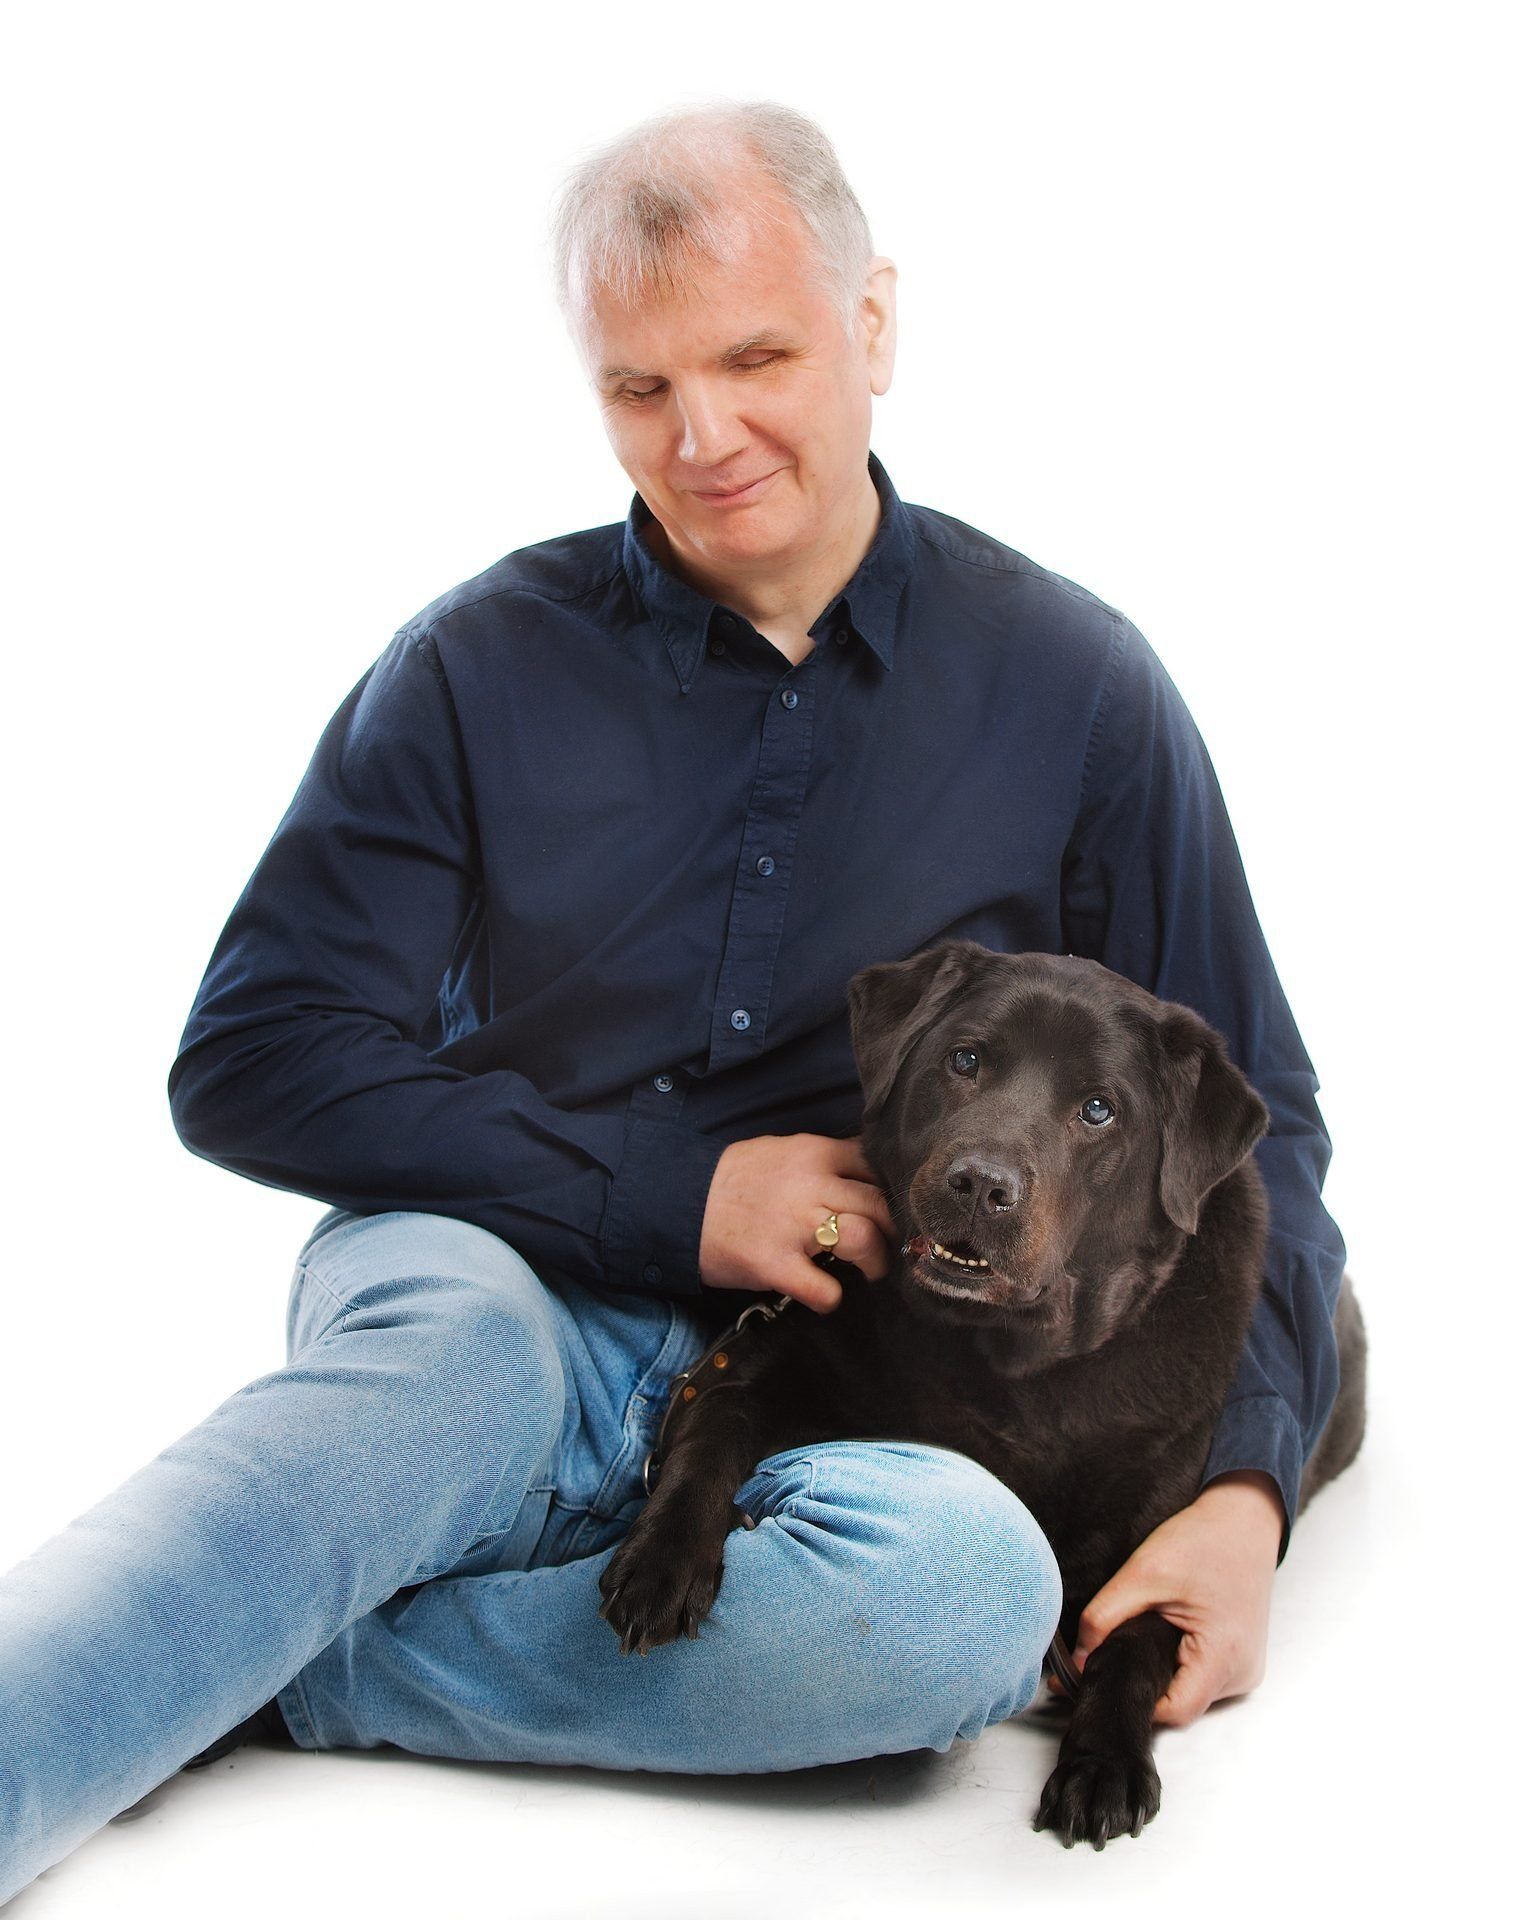 Informal pose of Philip Anderson sitting on the floor with one arm around his black guide dog, Quintana, who has one paw resting on his knee